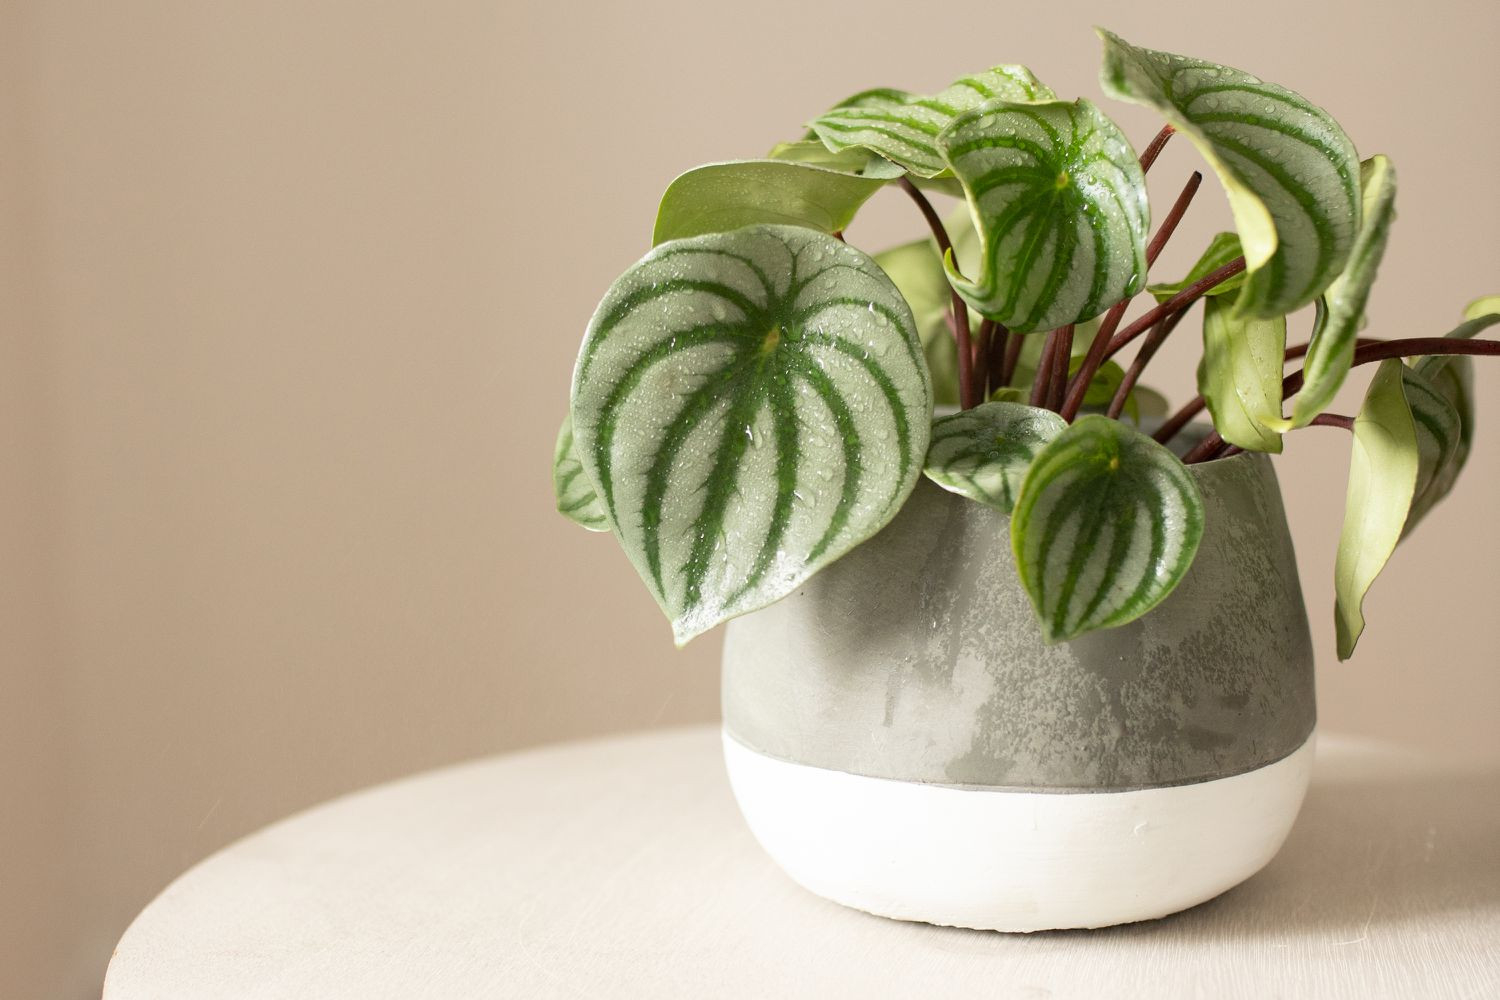 Watermelon Peperomia: Indoor Care And Growing Guide